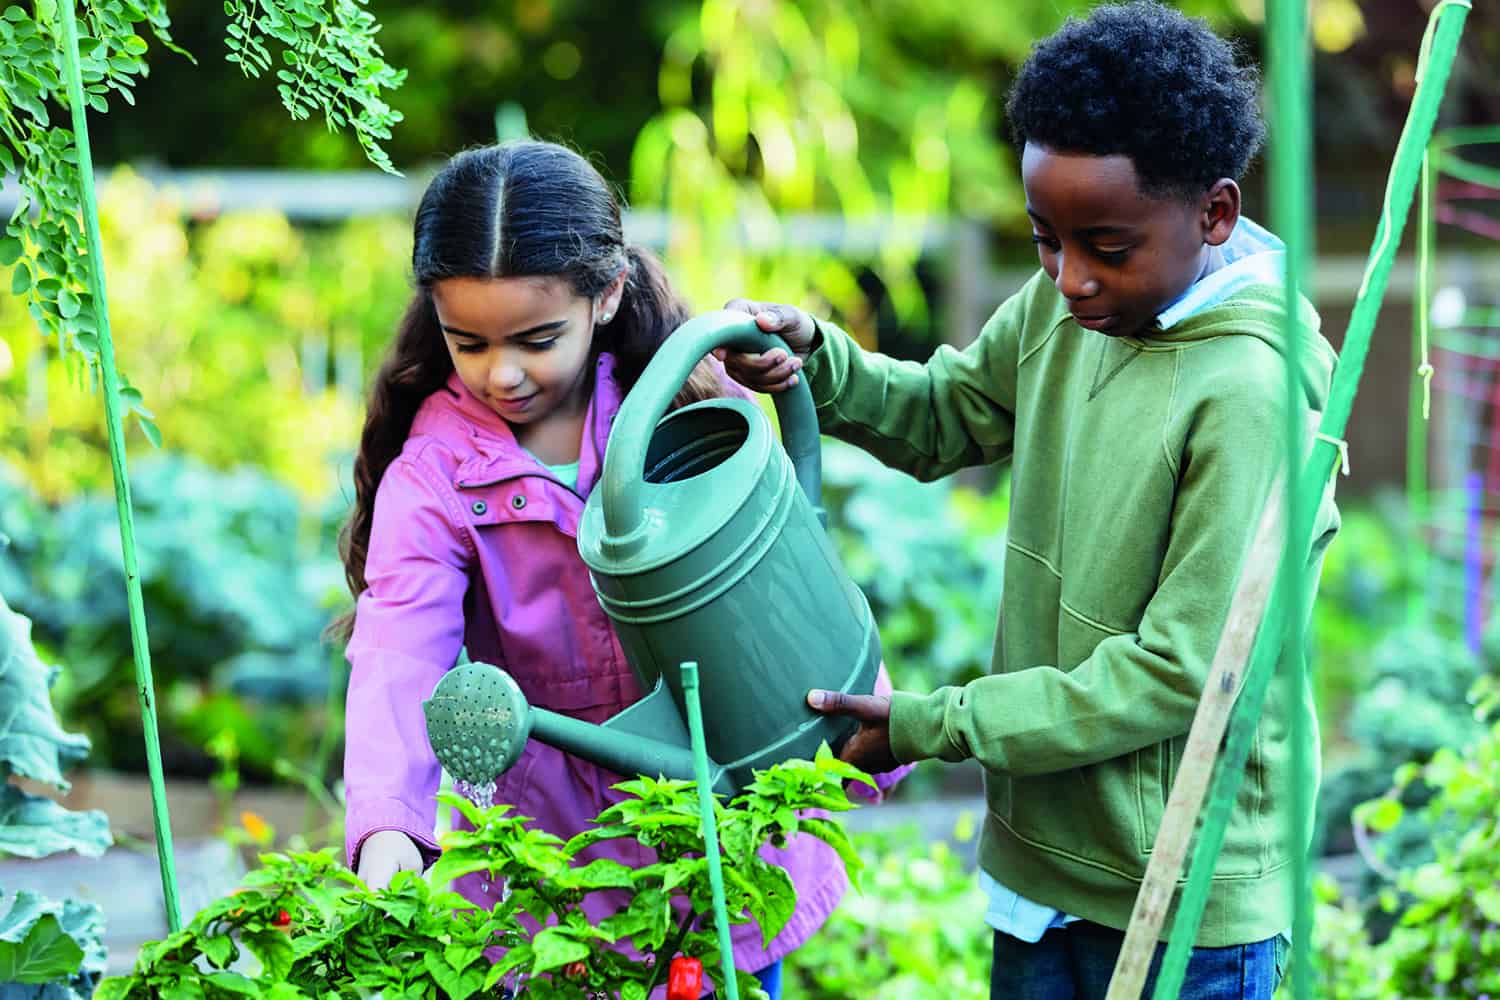 Two young children helping out in an allotment watering plants.